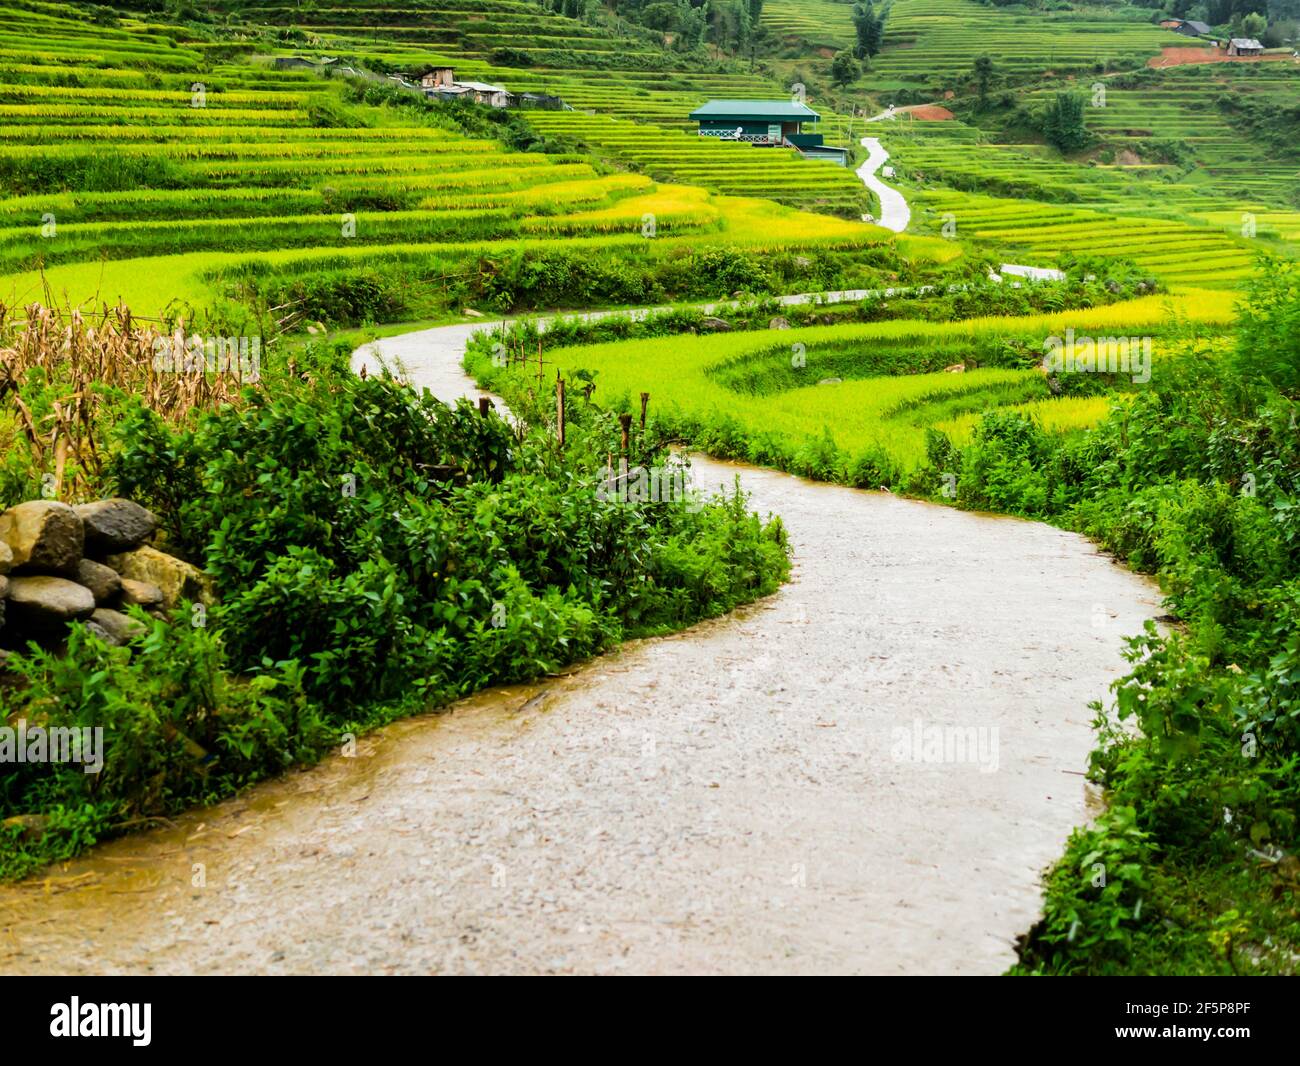 Gorgeous winding road through the terraced rice paddy fields of Sapa, northern Vietnam Stock Photo